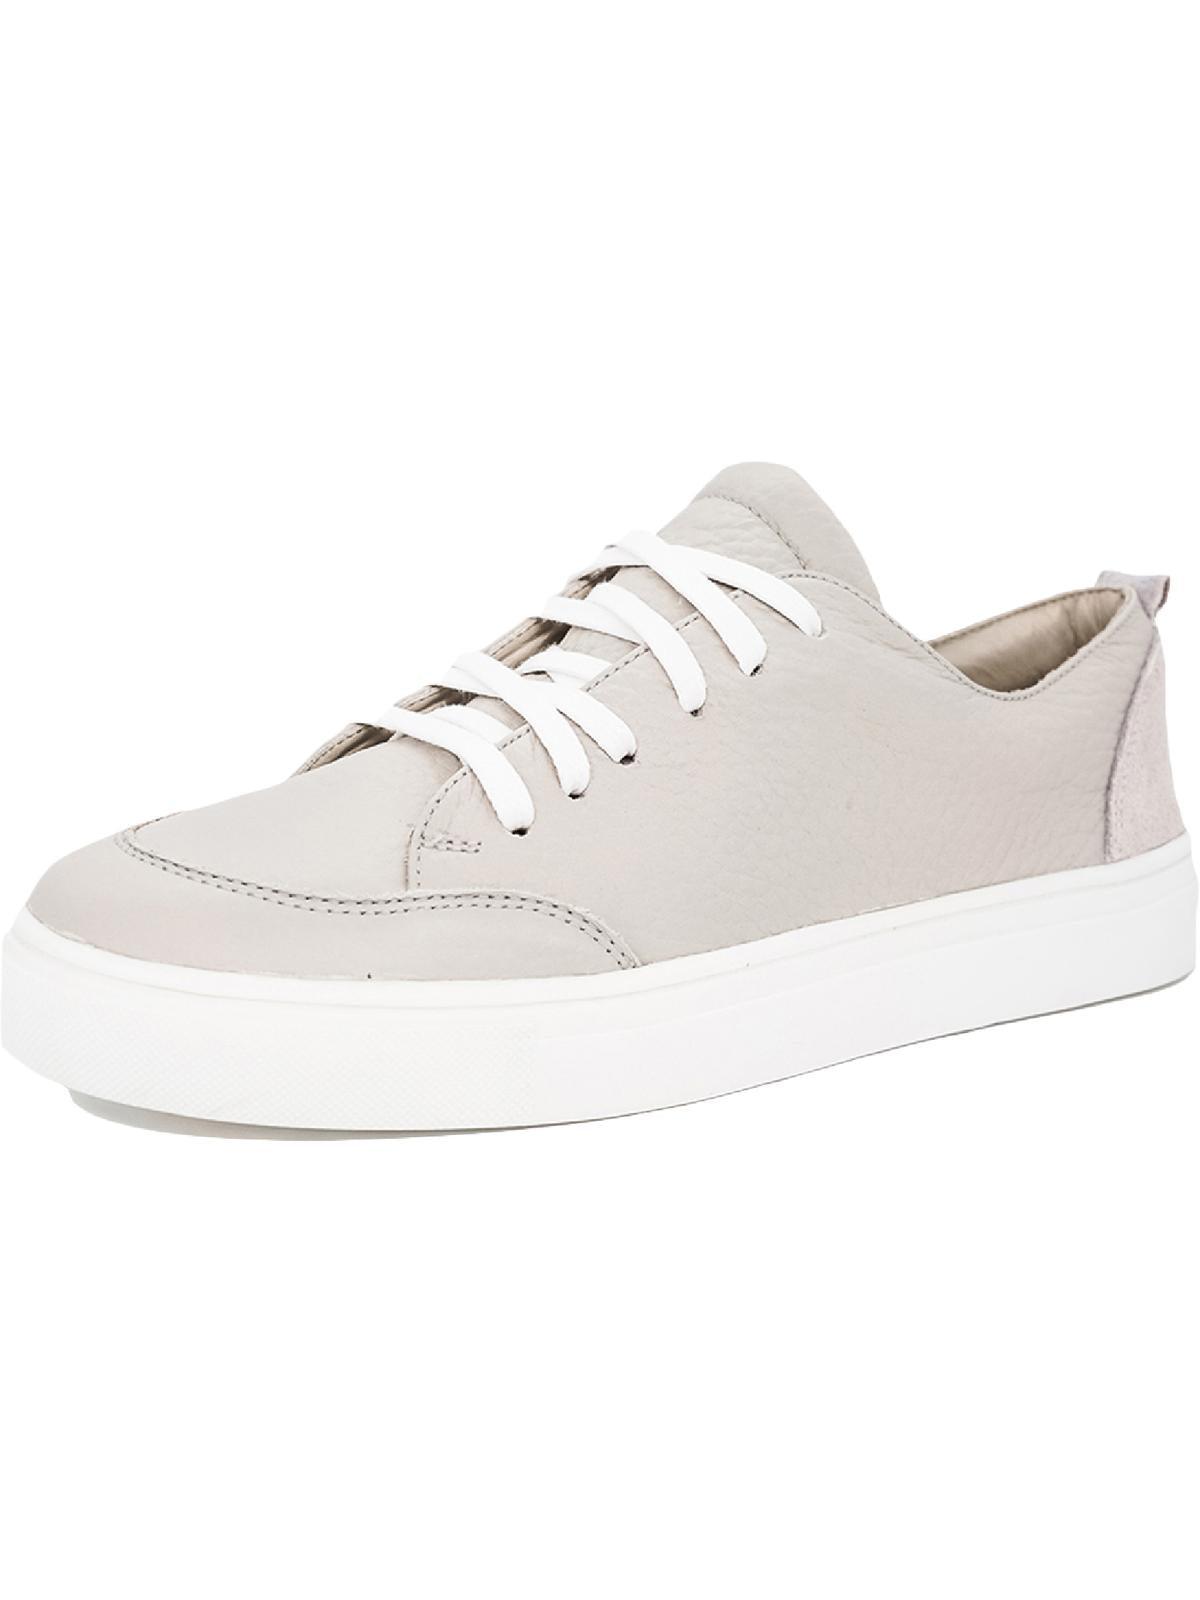 Kaanas Paris Fitness Lifestyle Athletic And Training Shoes in White | Lyst